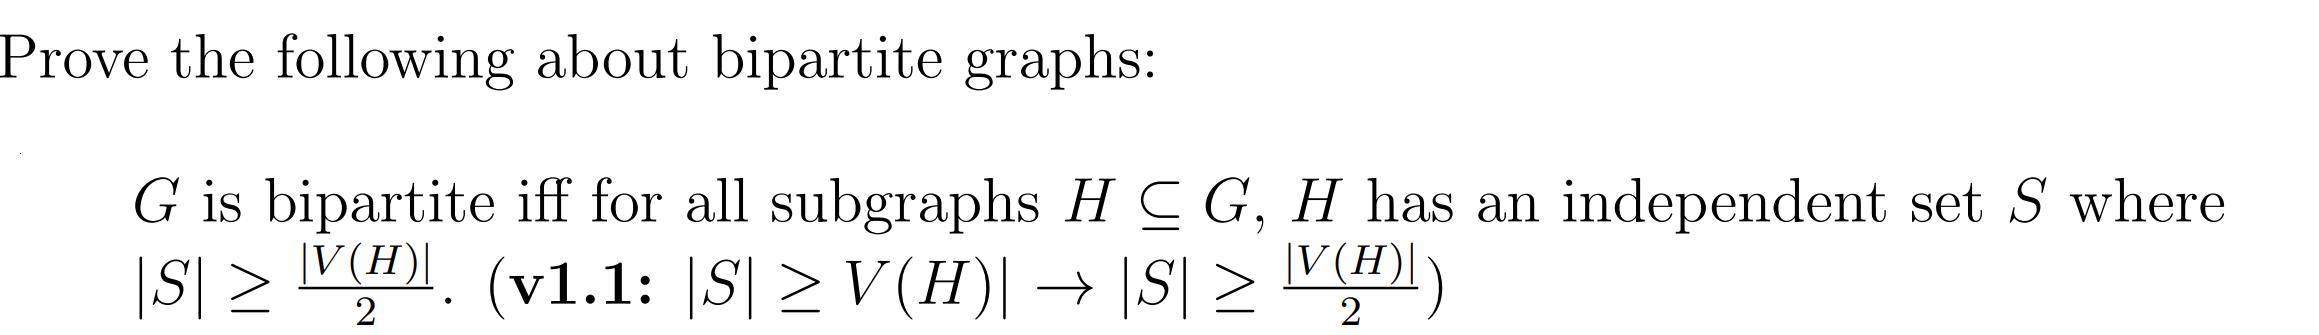 Prove the following about bipartite graphs: G is bipartite iff for all subgraphs H CG, H has an independent